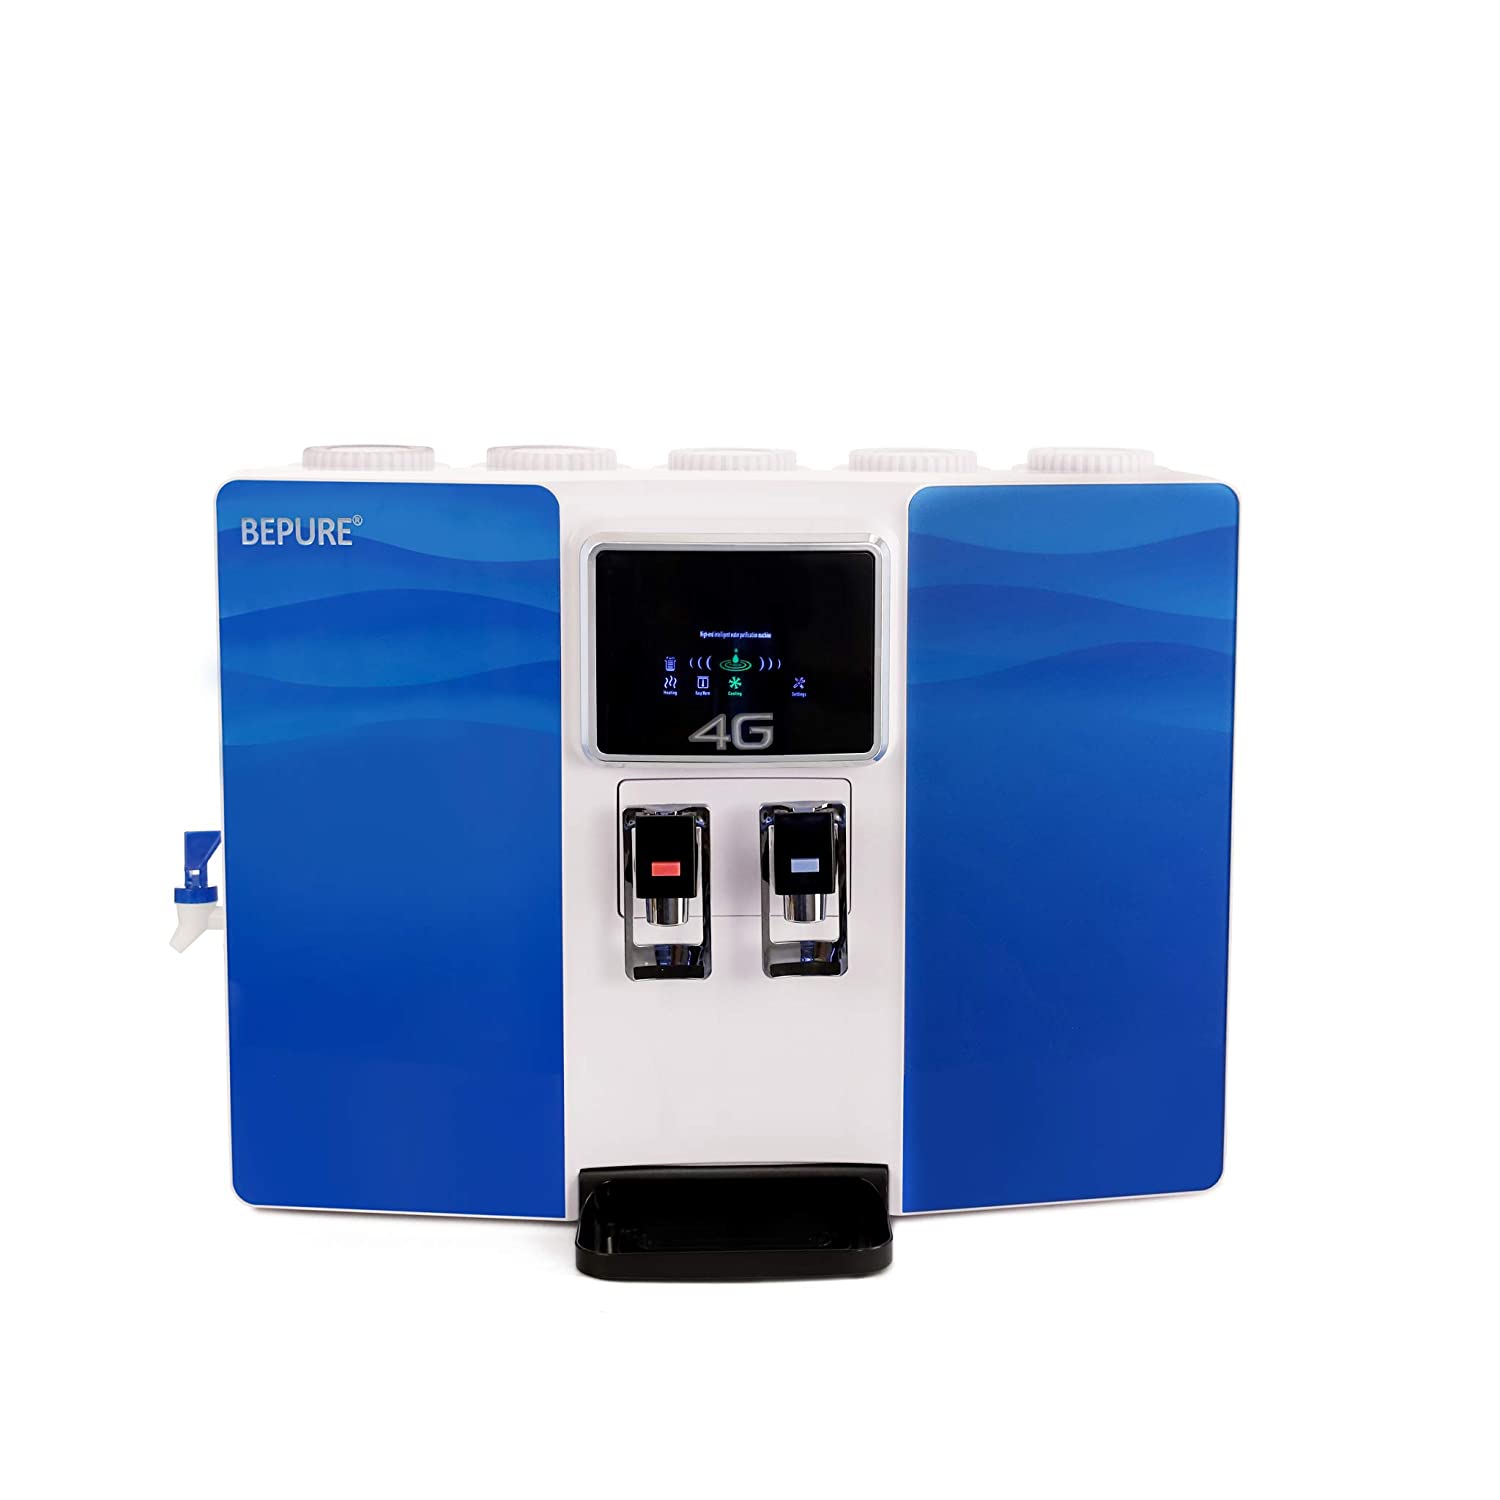 Bepure water purifier with hot and cold